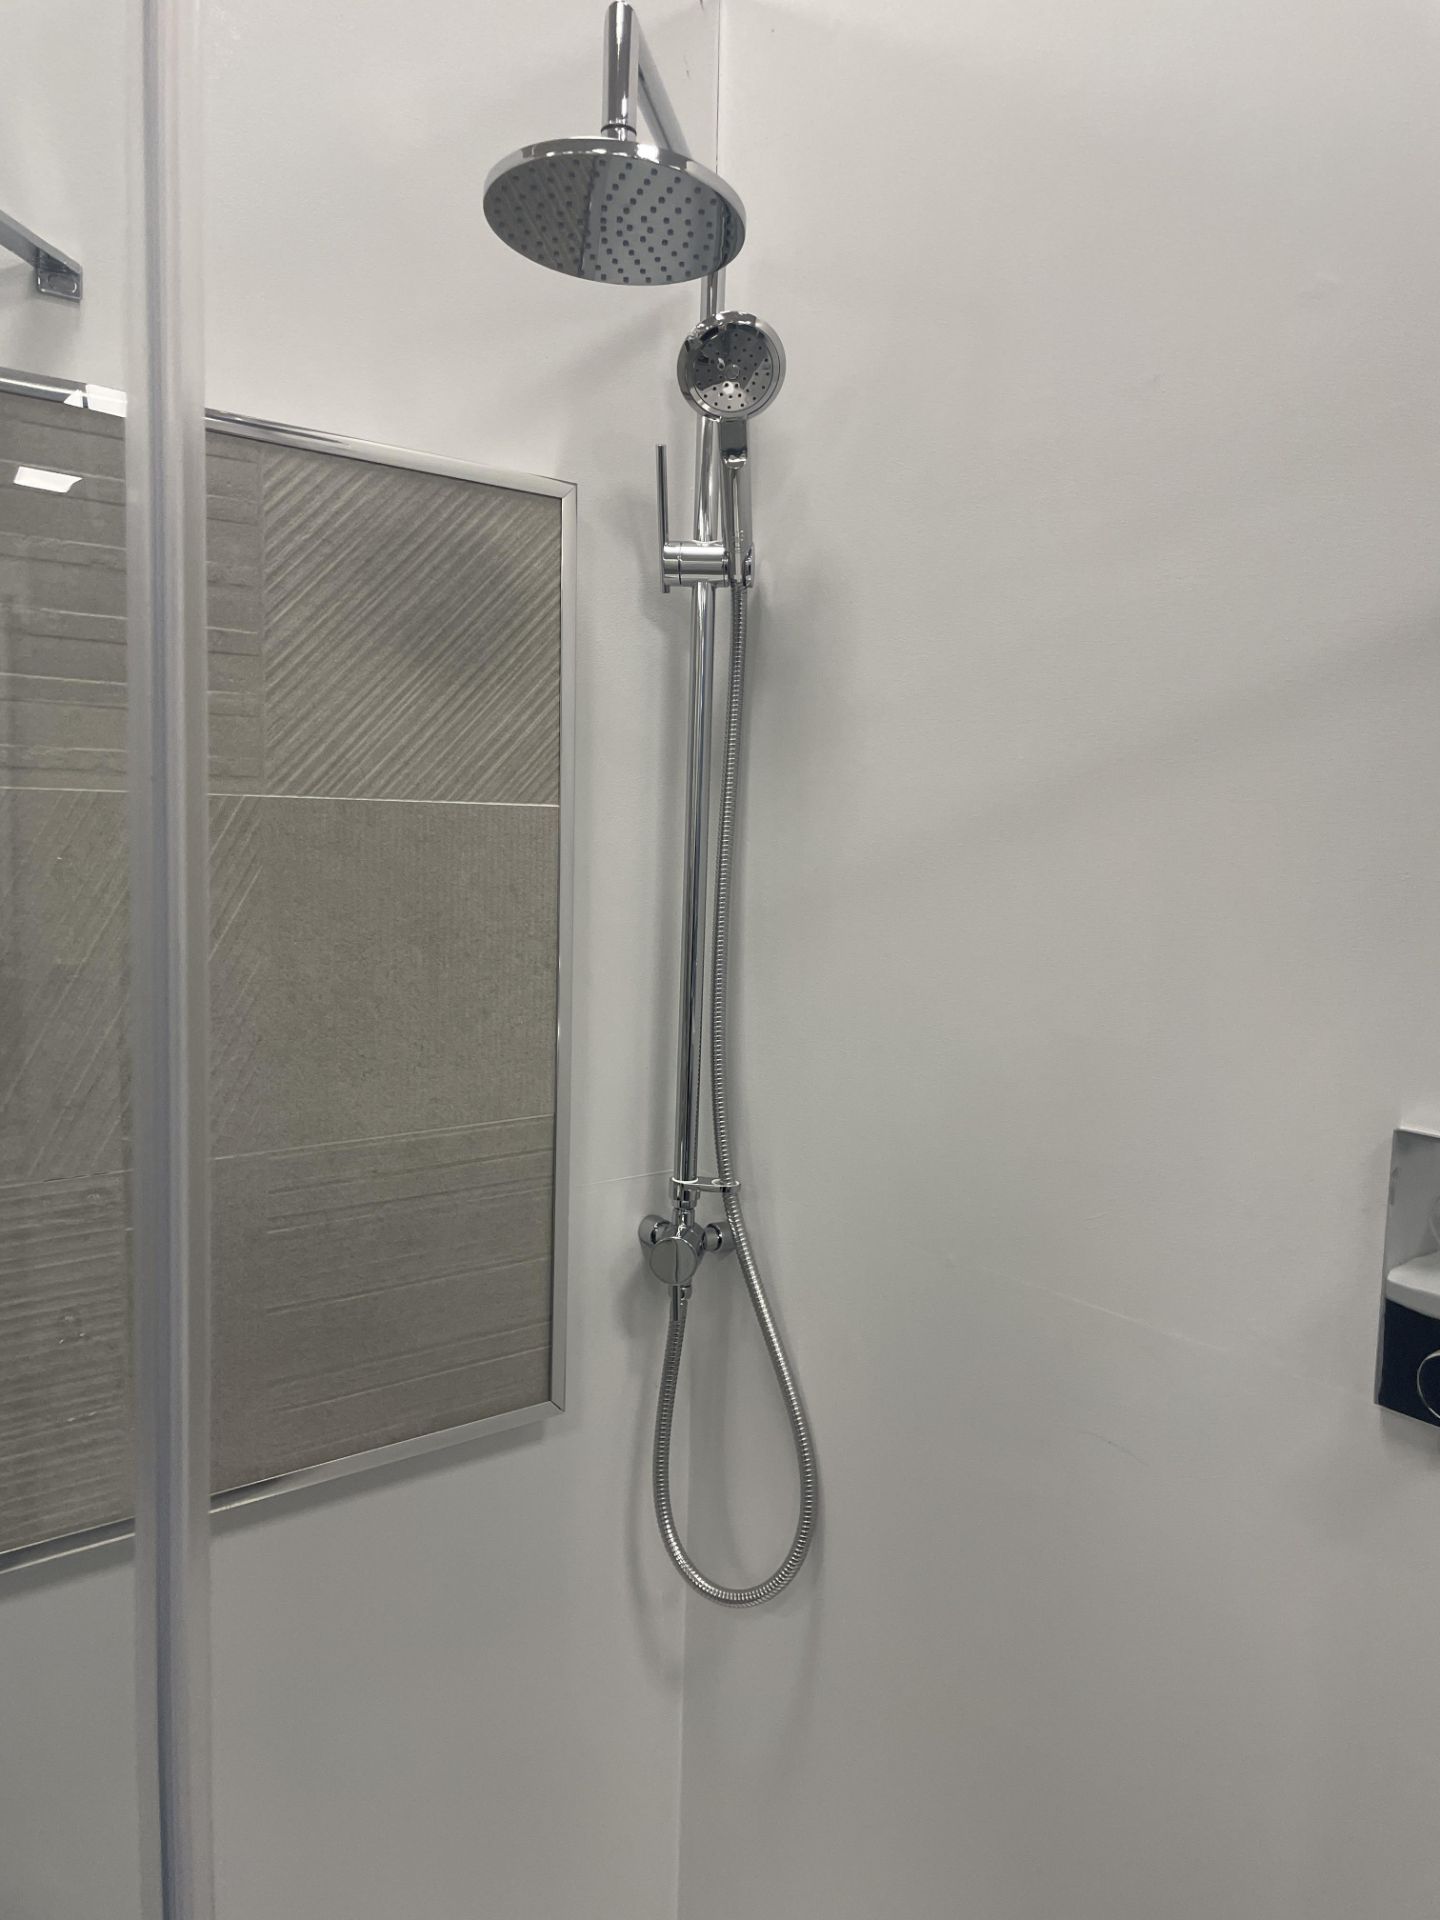 Matki Illusion Quintesse Shower Enclosure, with showerhead, flexible showerhead and mixers, - Image 3 of 4